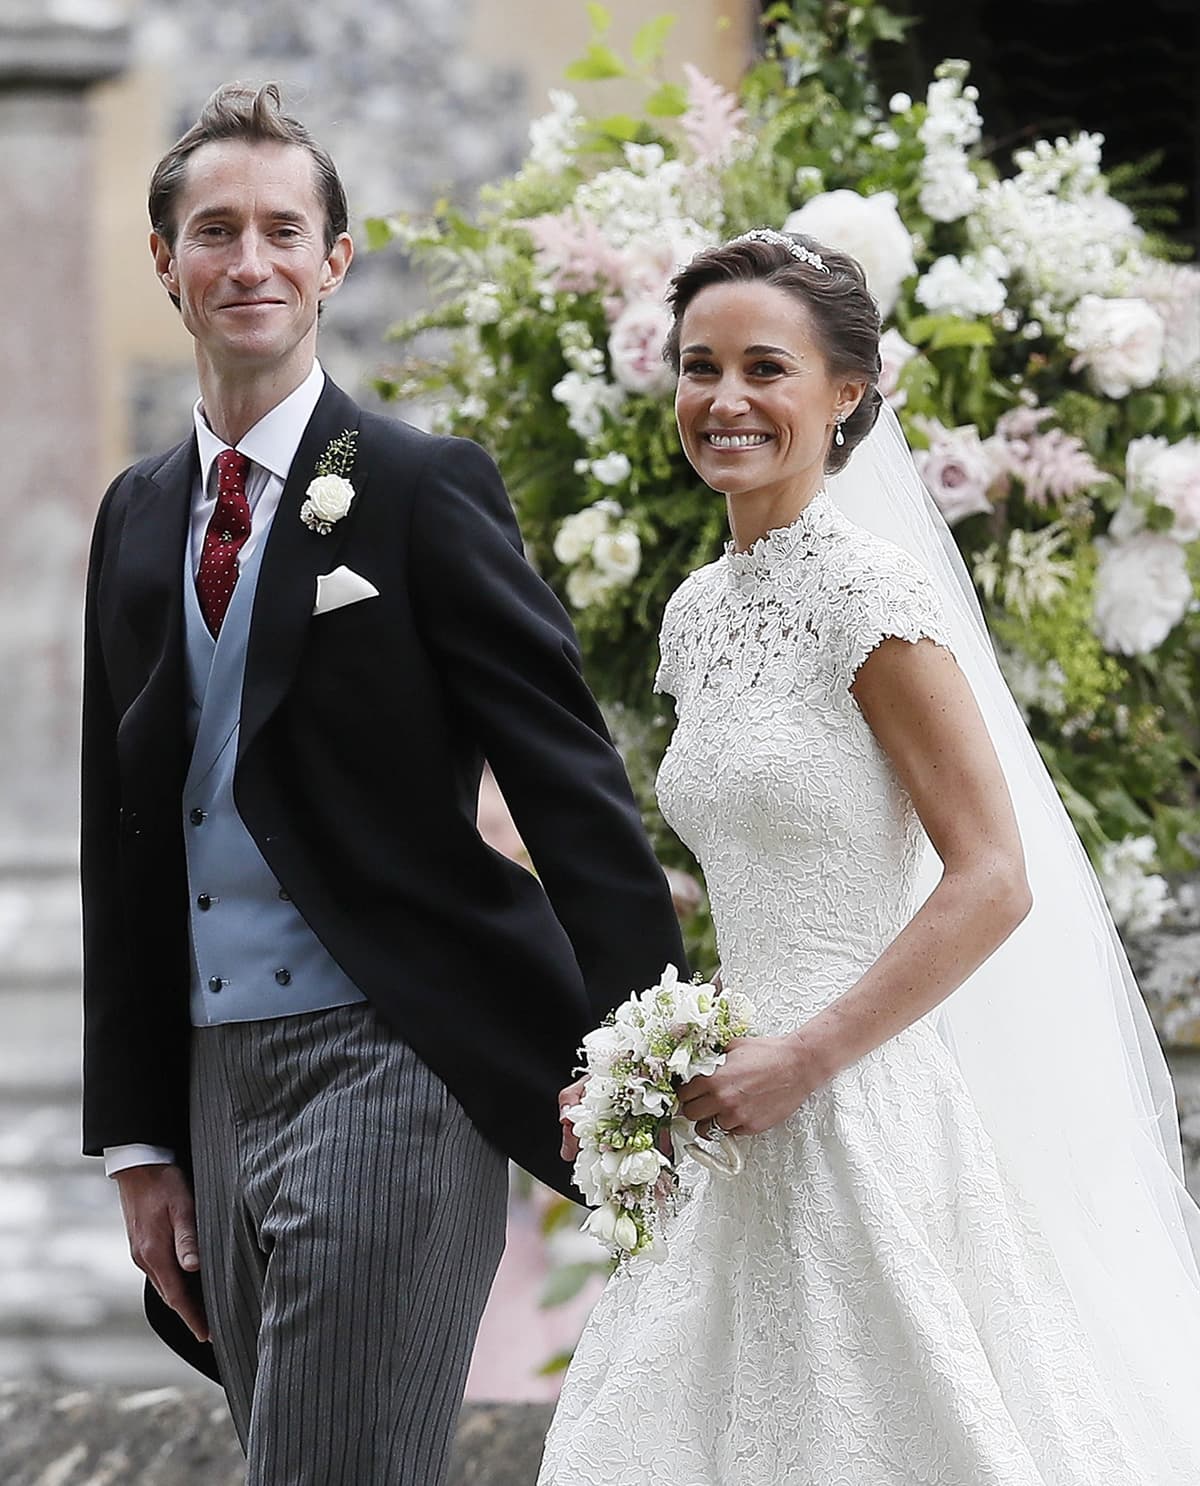 Pippa Middleton married James Matthews in a custom Giles Deacon wedding gown and a bespoke veil by Stephen Jones